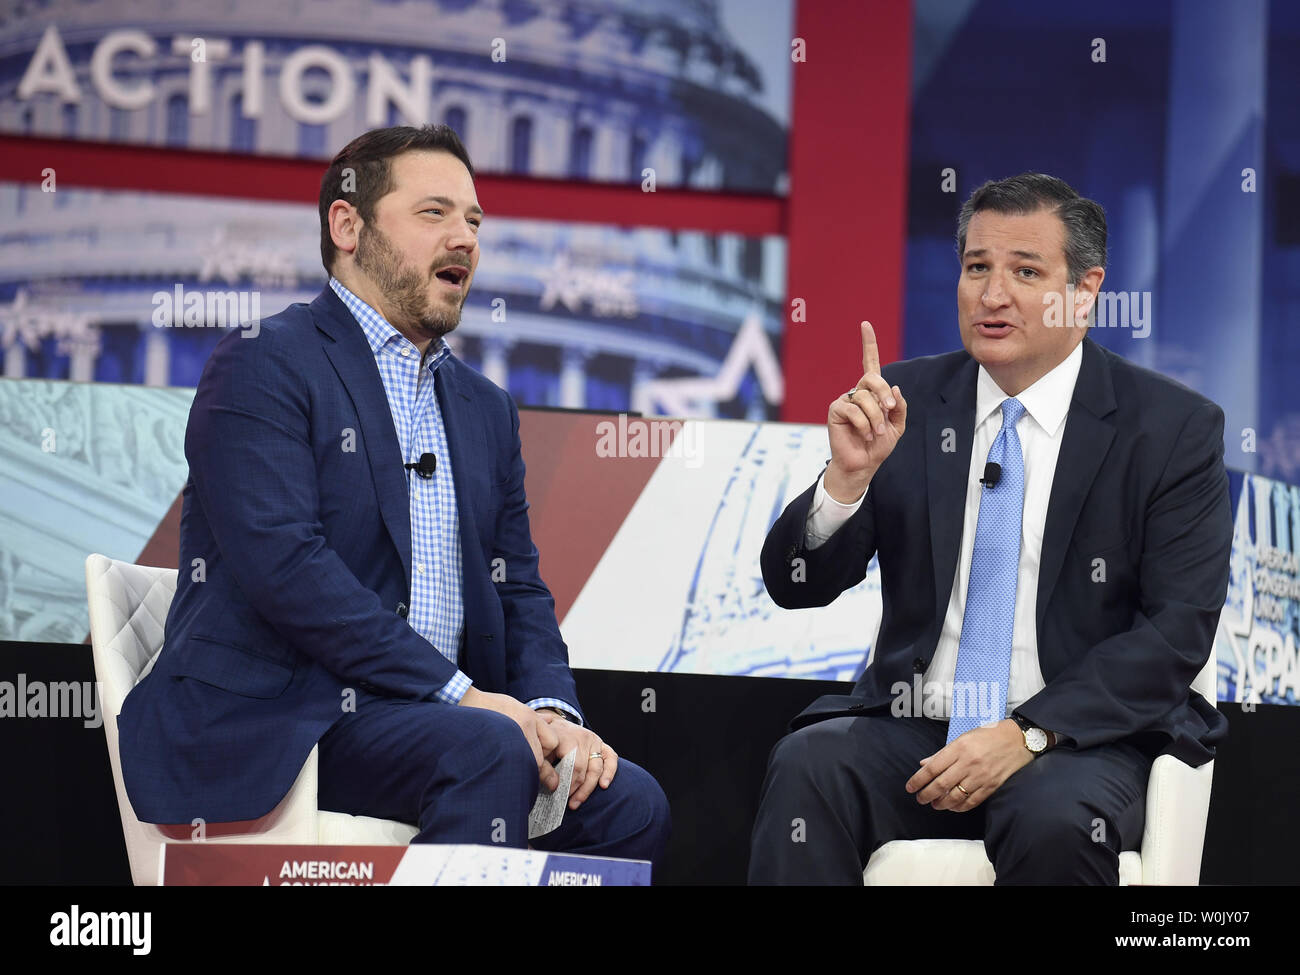 Sen. Ted Cruz of Texas (R) makes remarks during a conversation with The Federalist's Ben Domenech at the Conservative Political Action Conference (CPAC), February 22, 2018, in National Harbor, Maryland. Thousands of conservative activists, Republicans and Tea Party Patriots gathered to hear politicians and radio and TV hosts speak, lobby and network for the conservative cause.                  Photo by Mike Theiler/UPI Stock Photo